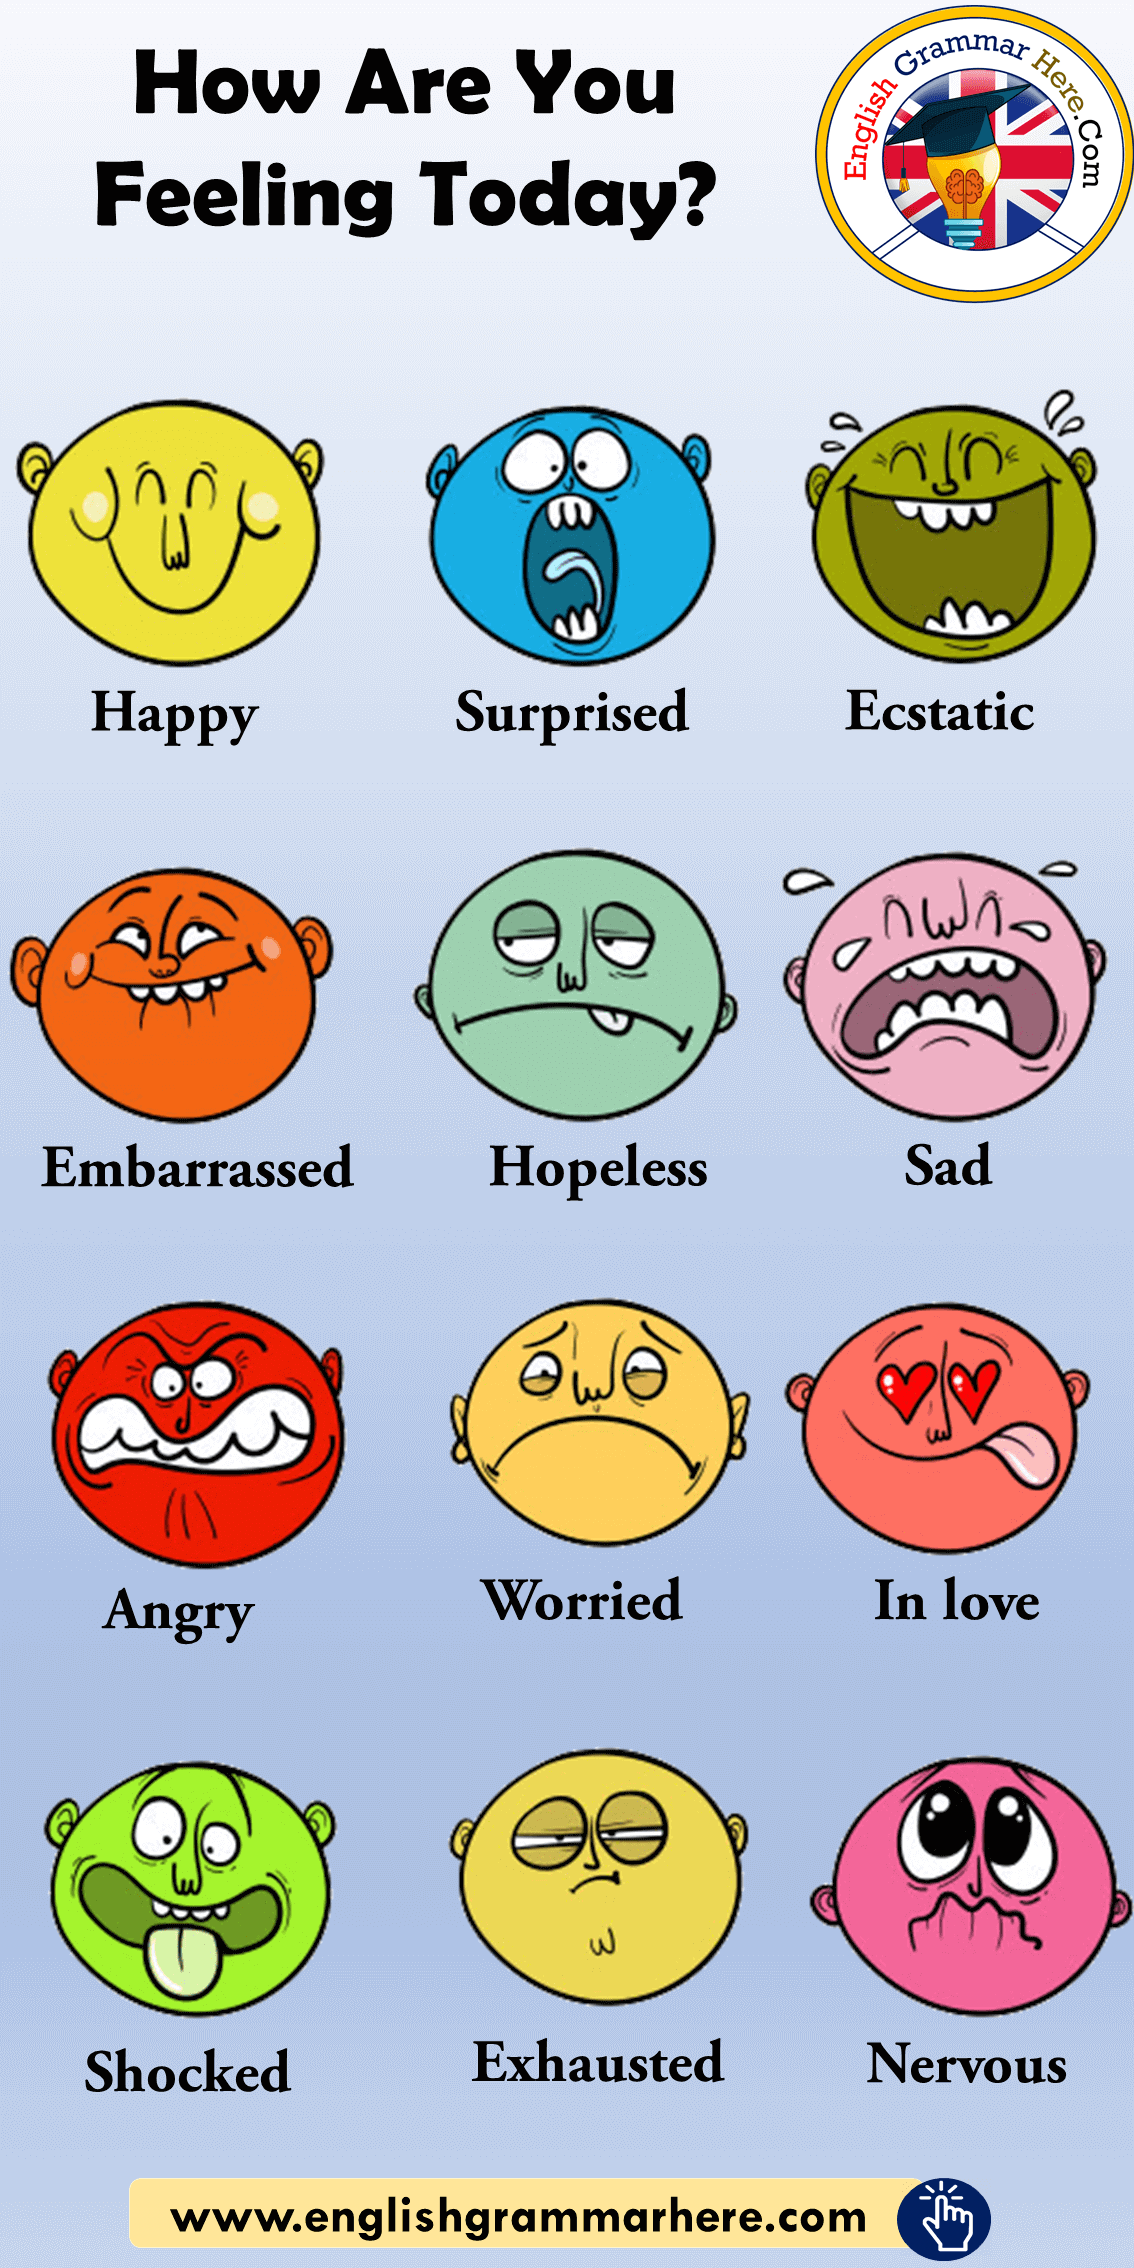 English Feeling Words, How Are You Feeling Today?